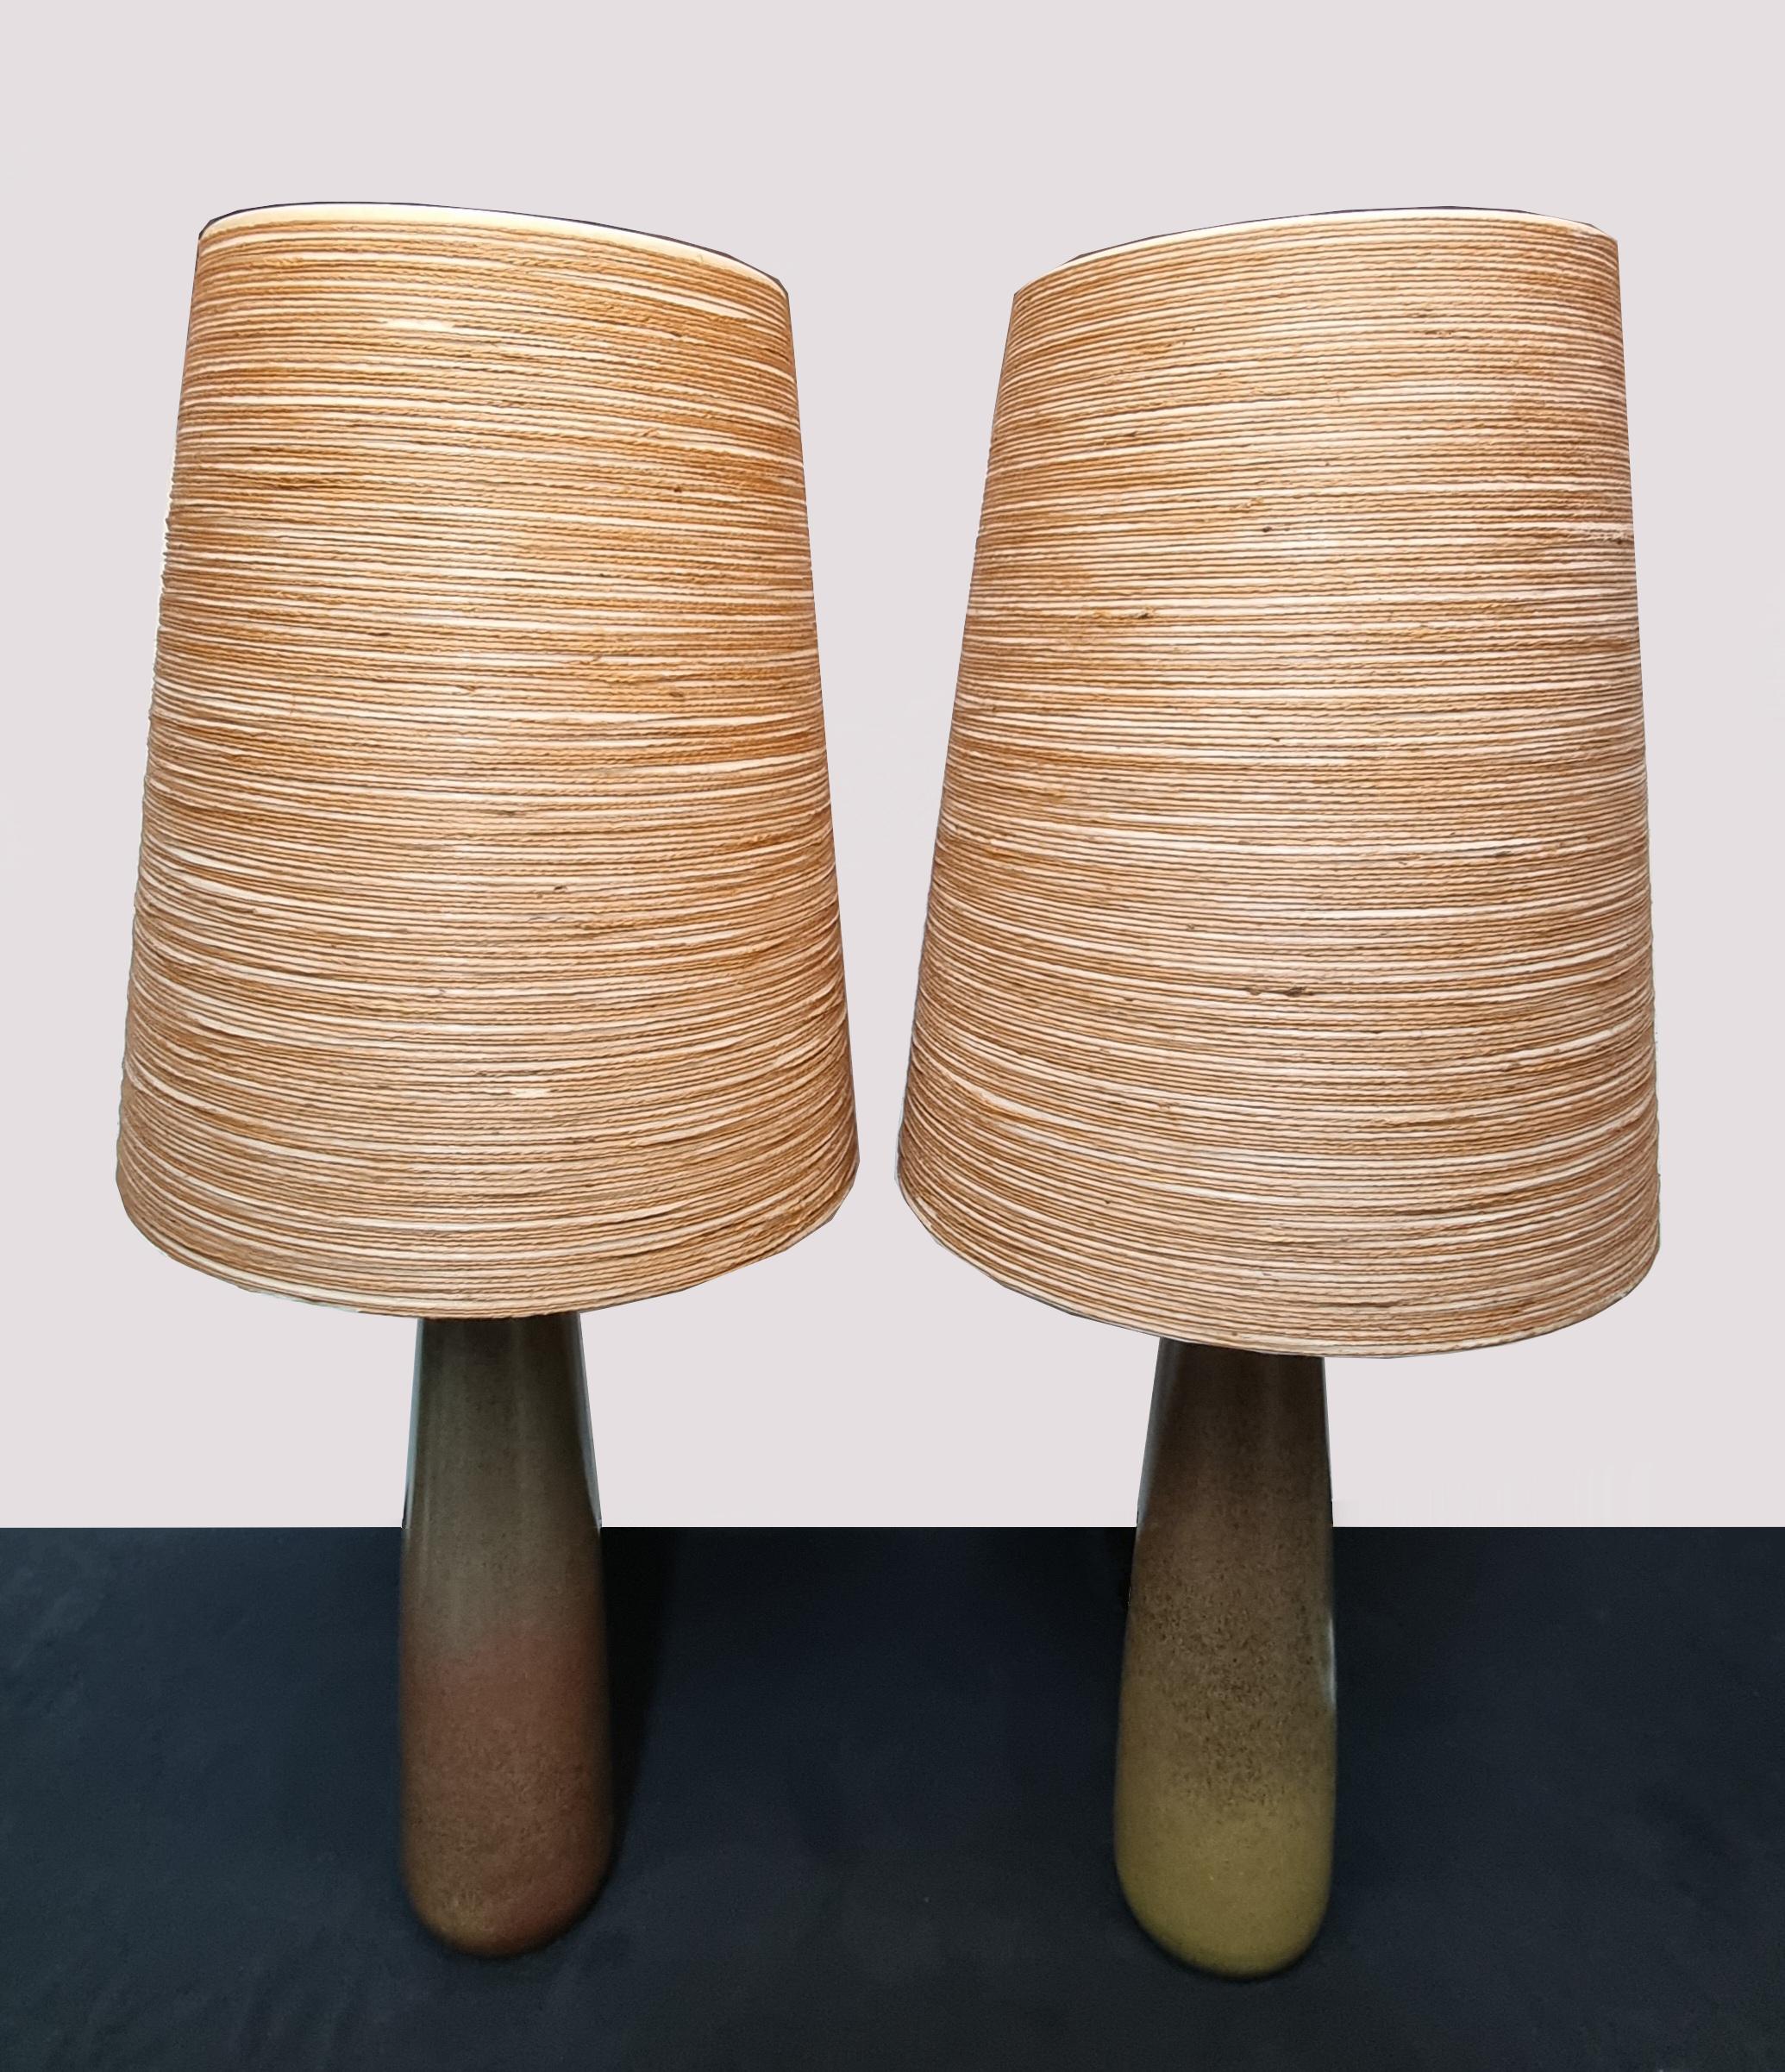 Impressive Large Pair of 1960's Ceramic Lamps by Lotte and Gunnar Bostlund  For Sale 9